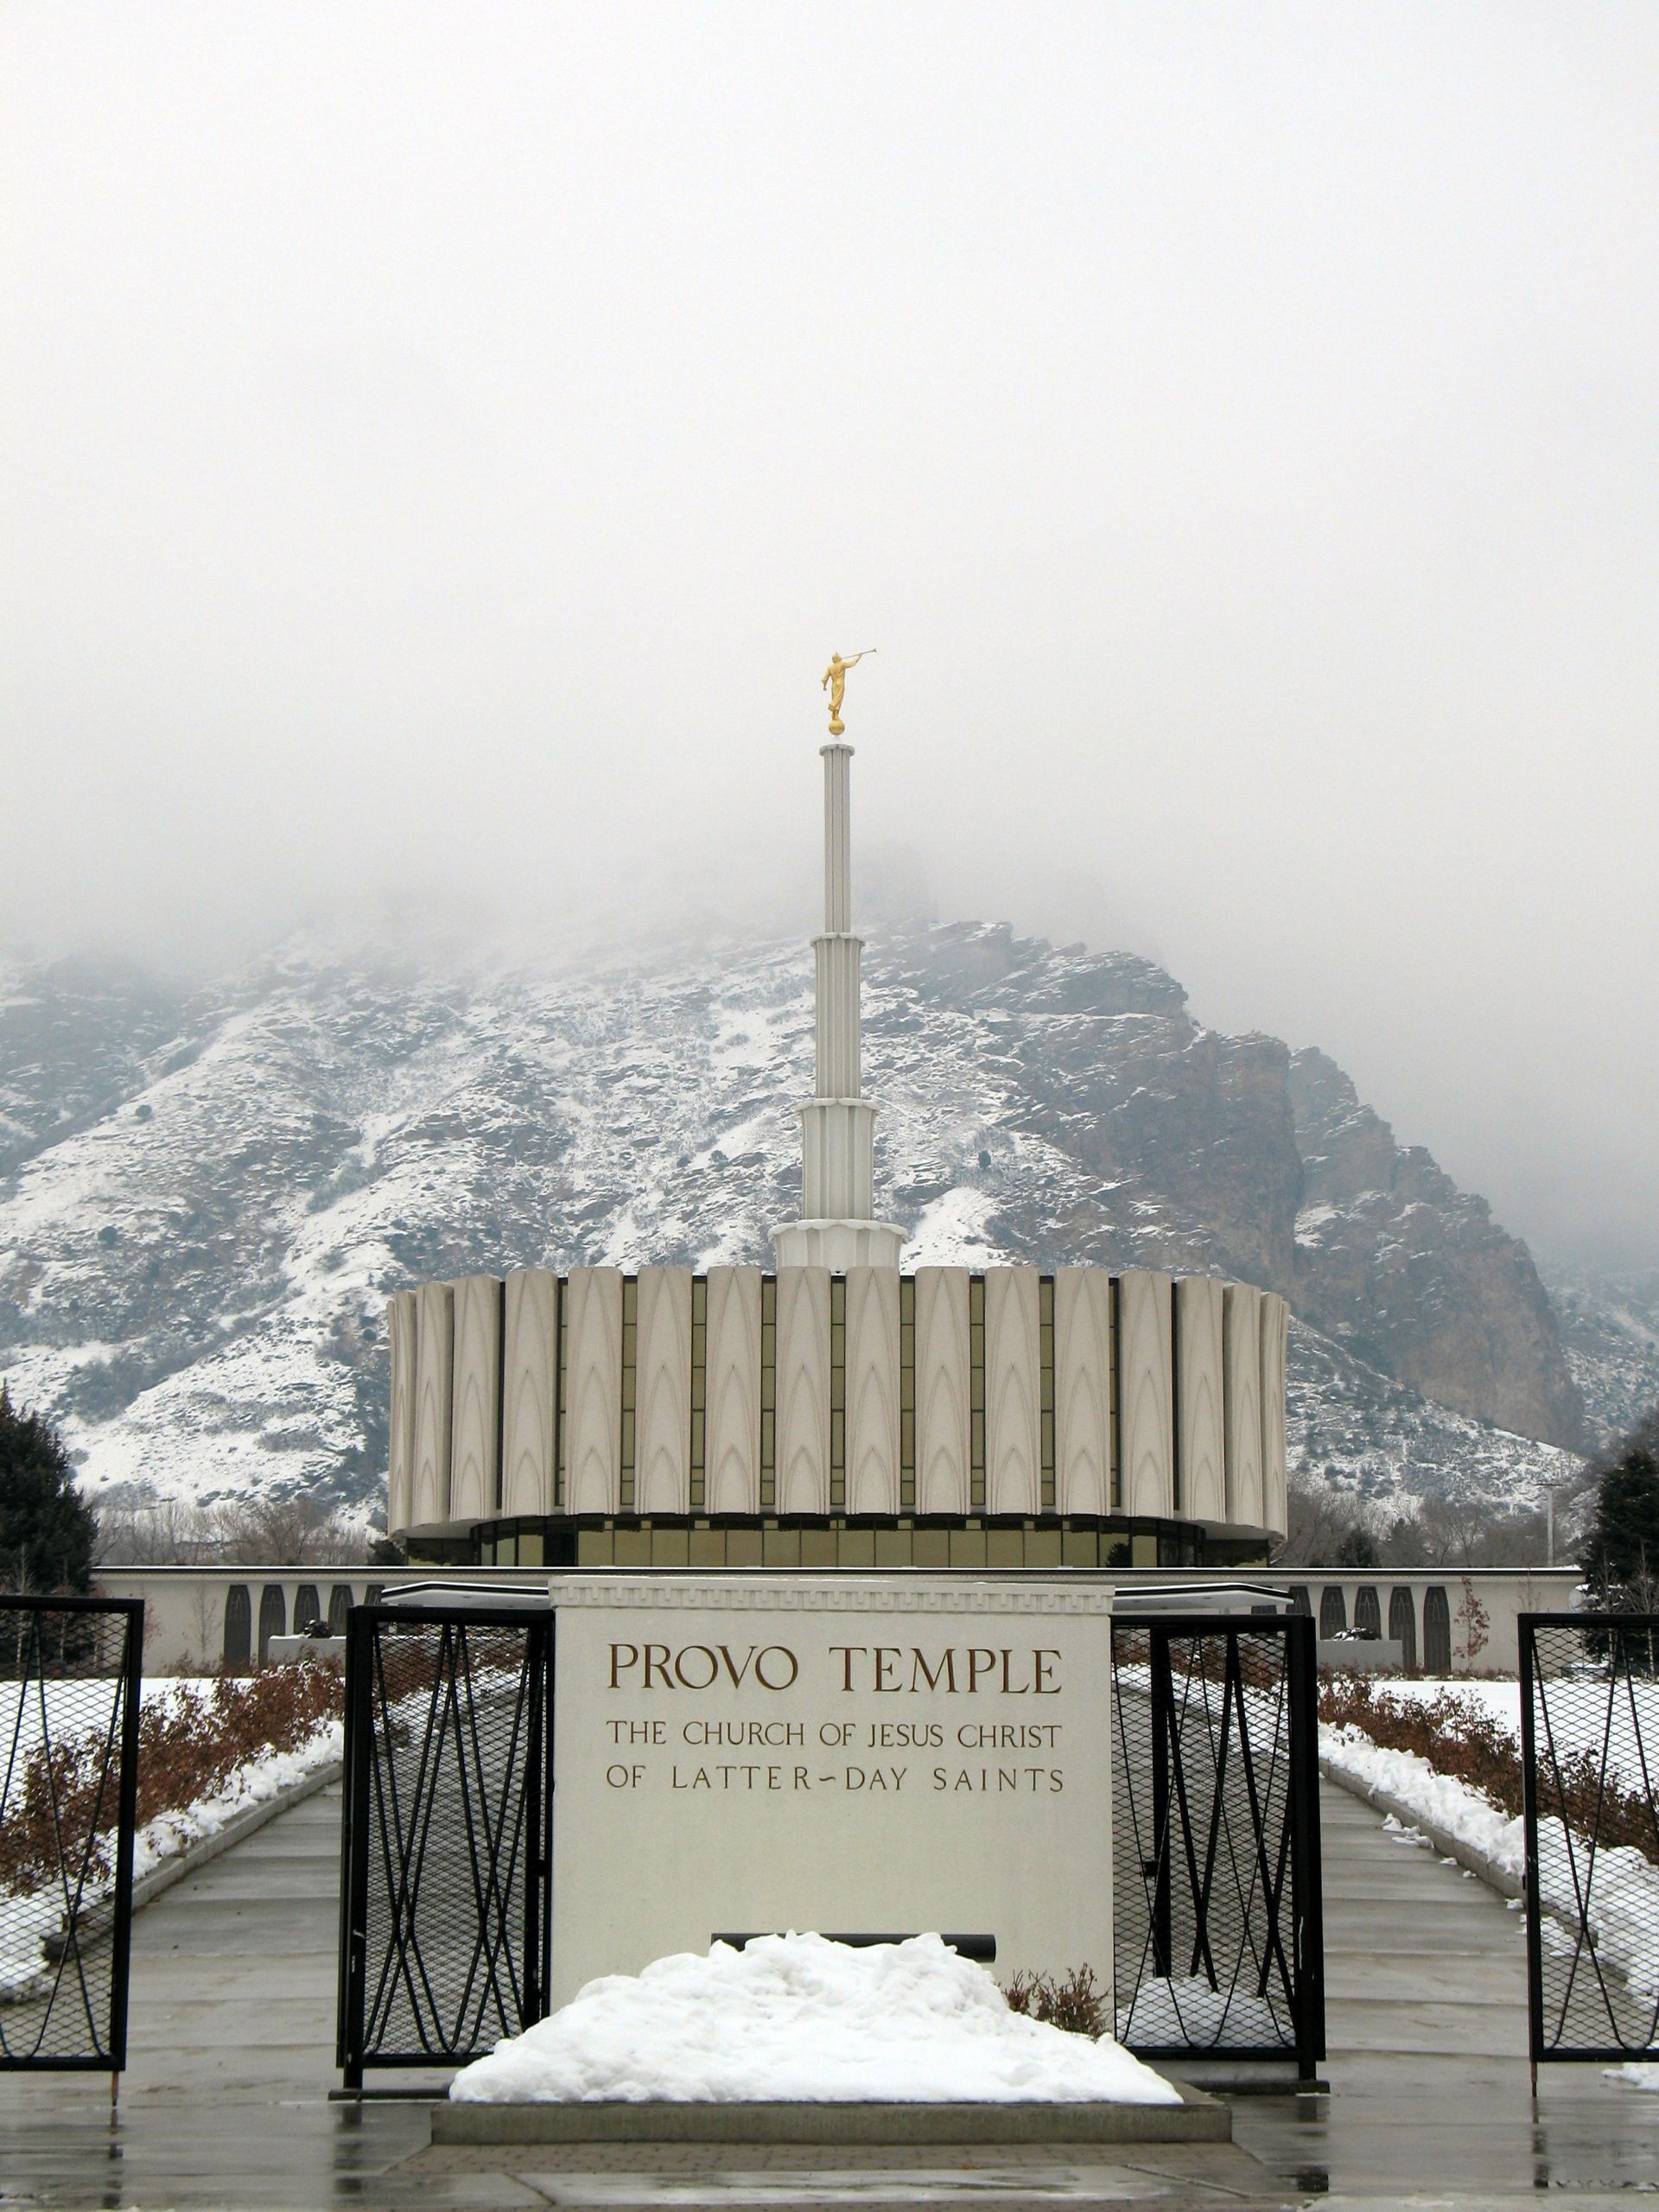 The Provo Utah Temple in the winter, including the name sign and scenery.